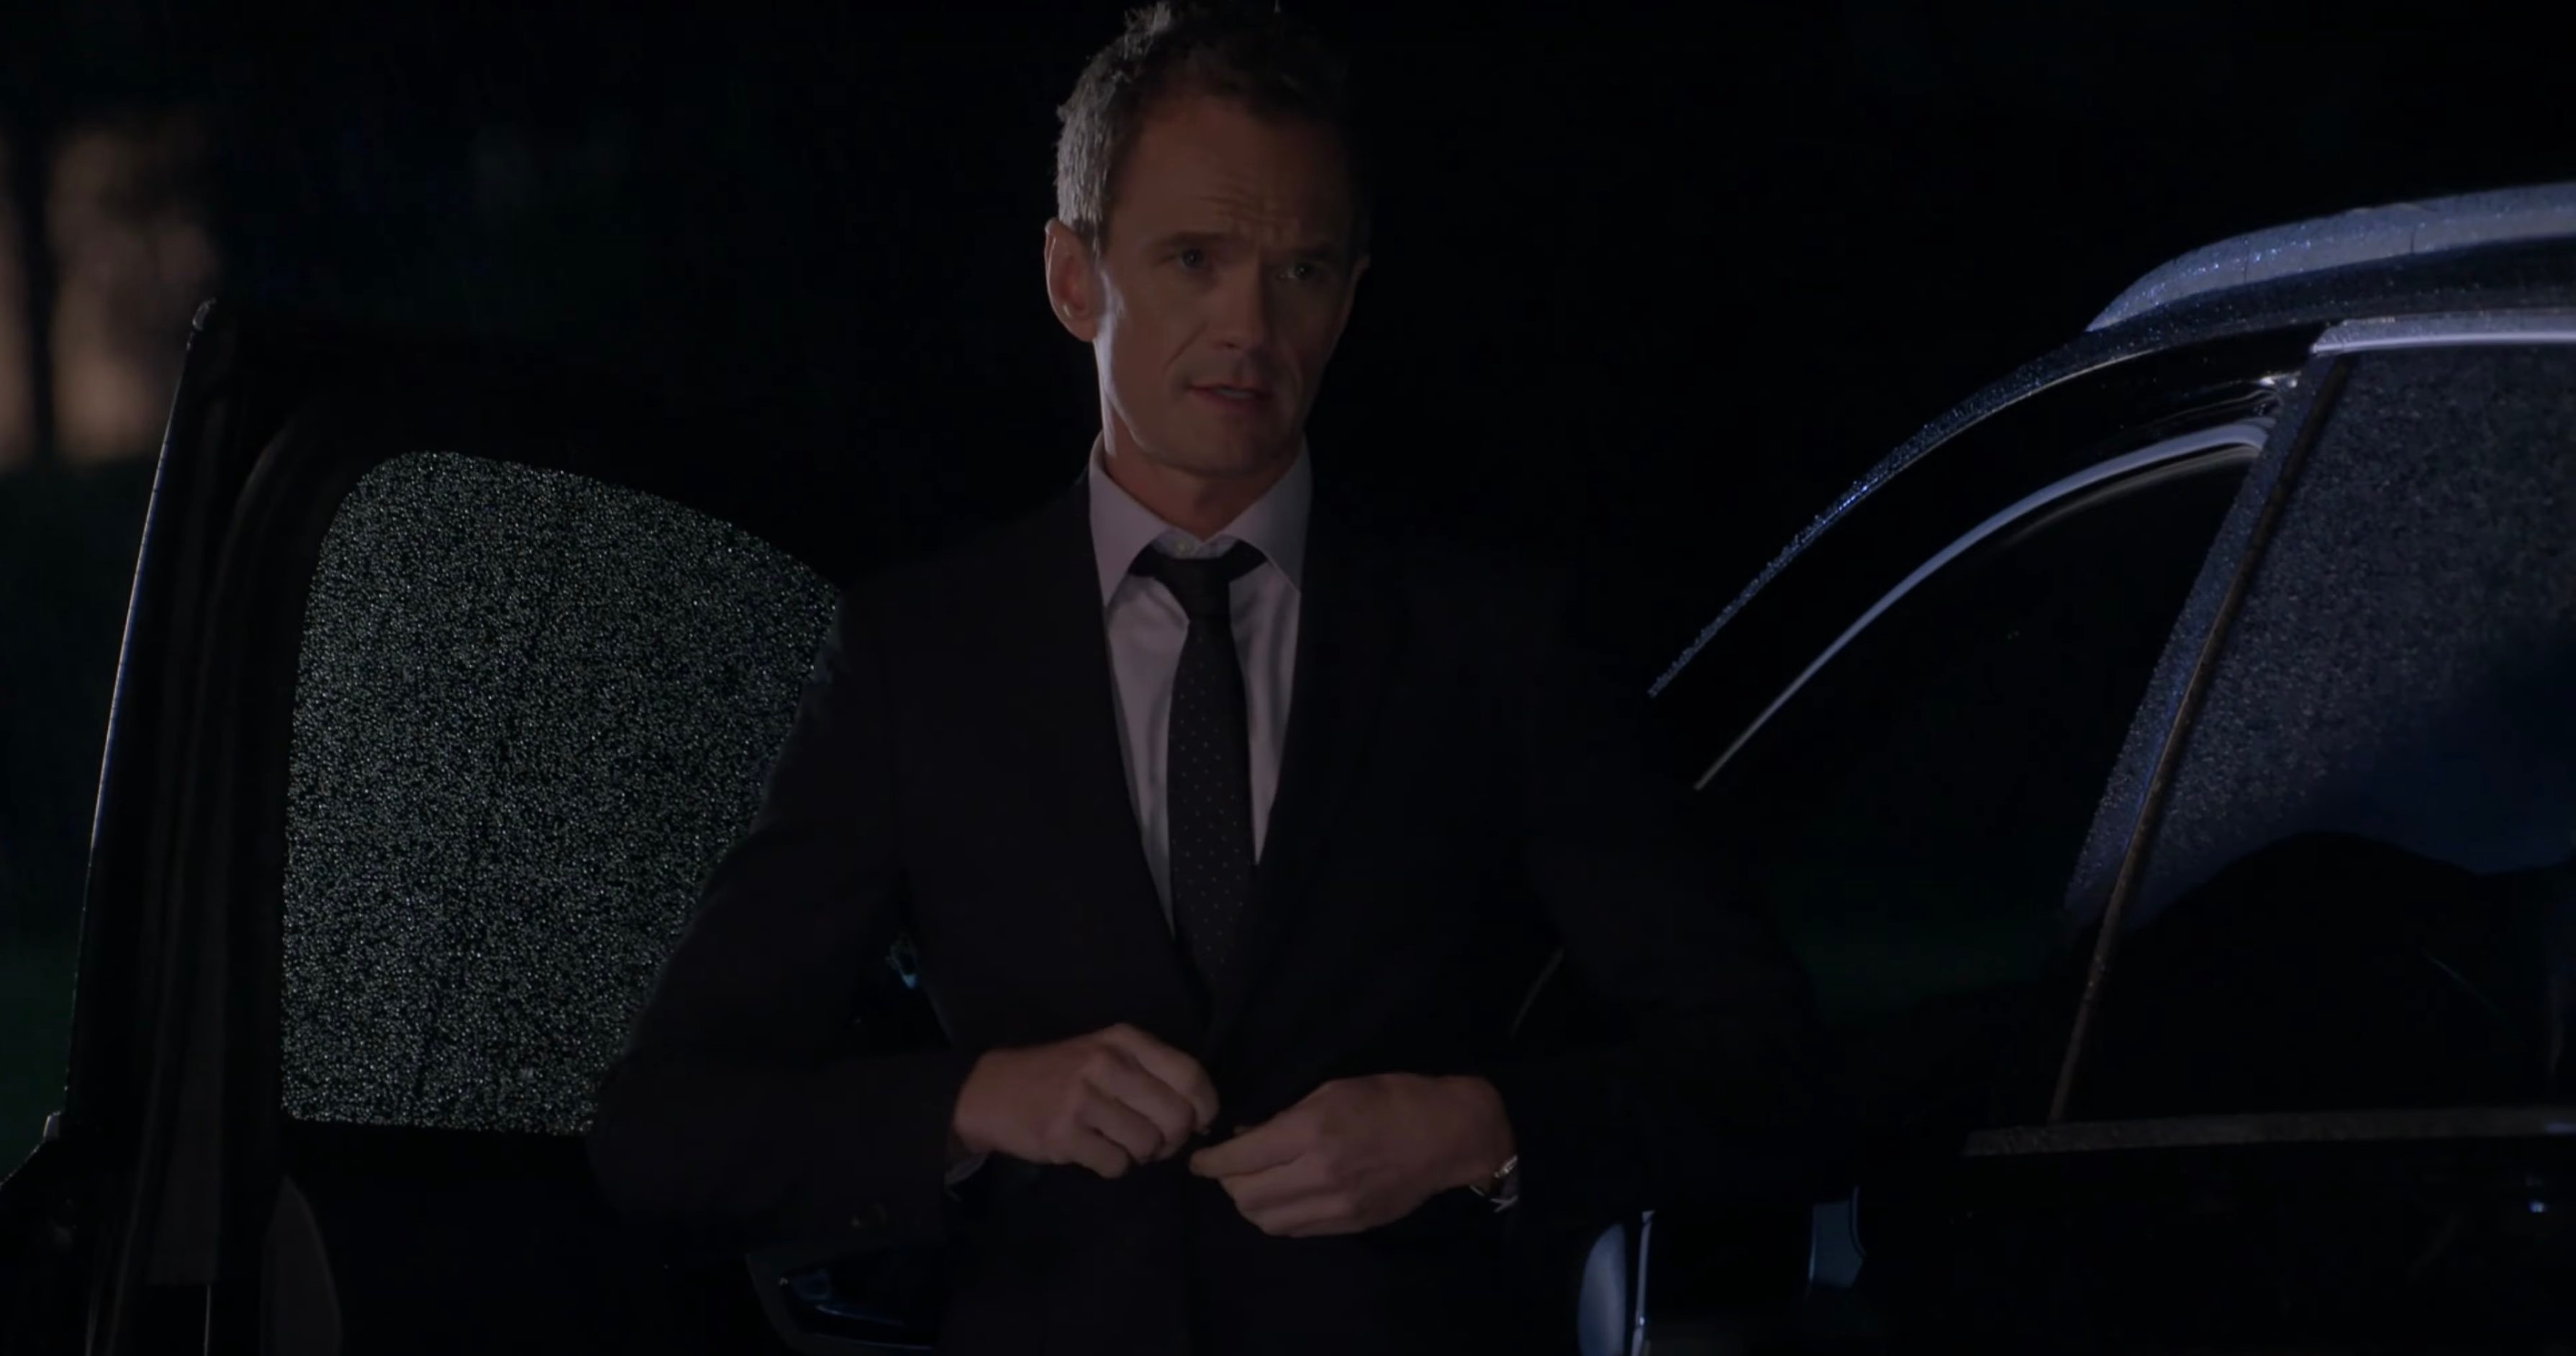 Neil Patrick Harris Returns as Barney Stinson in 'How I Met Your Father'